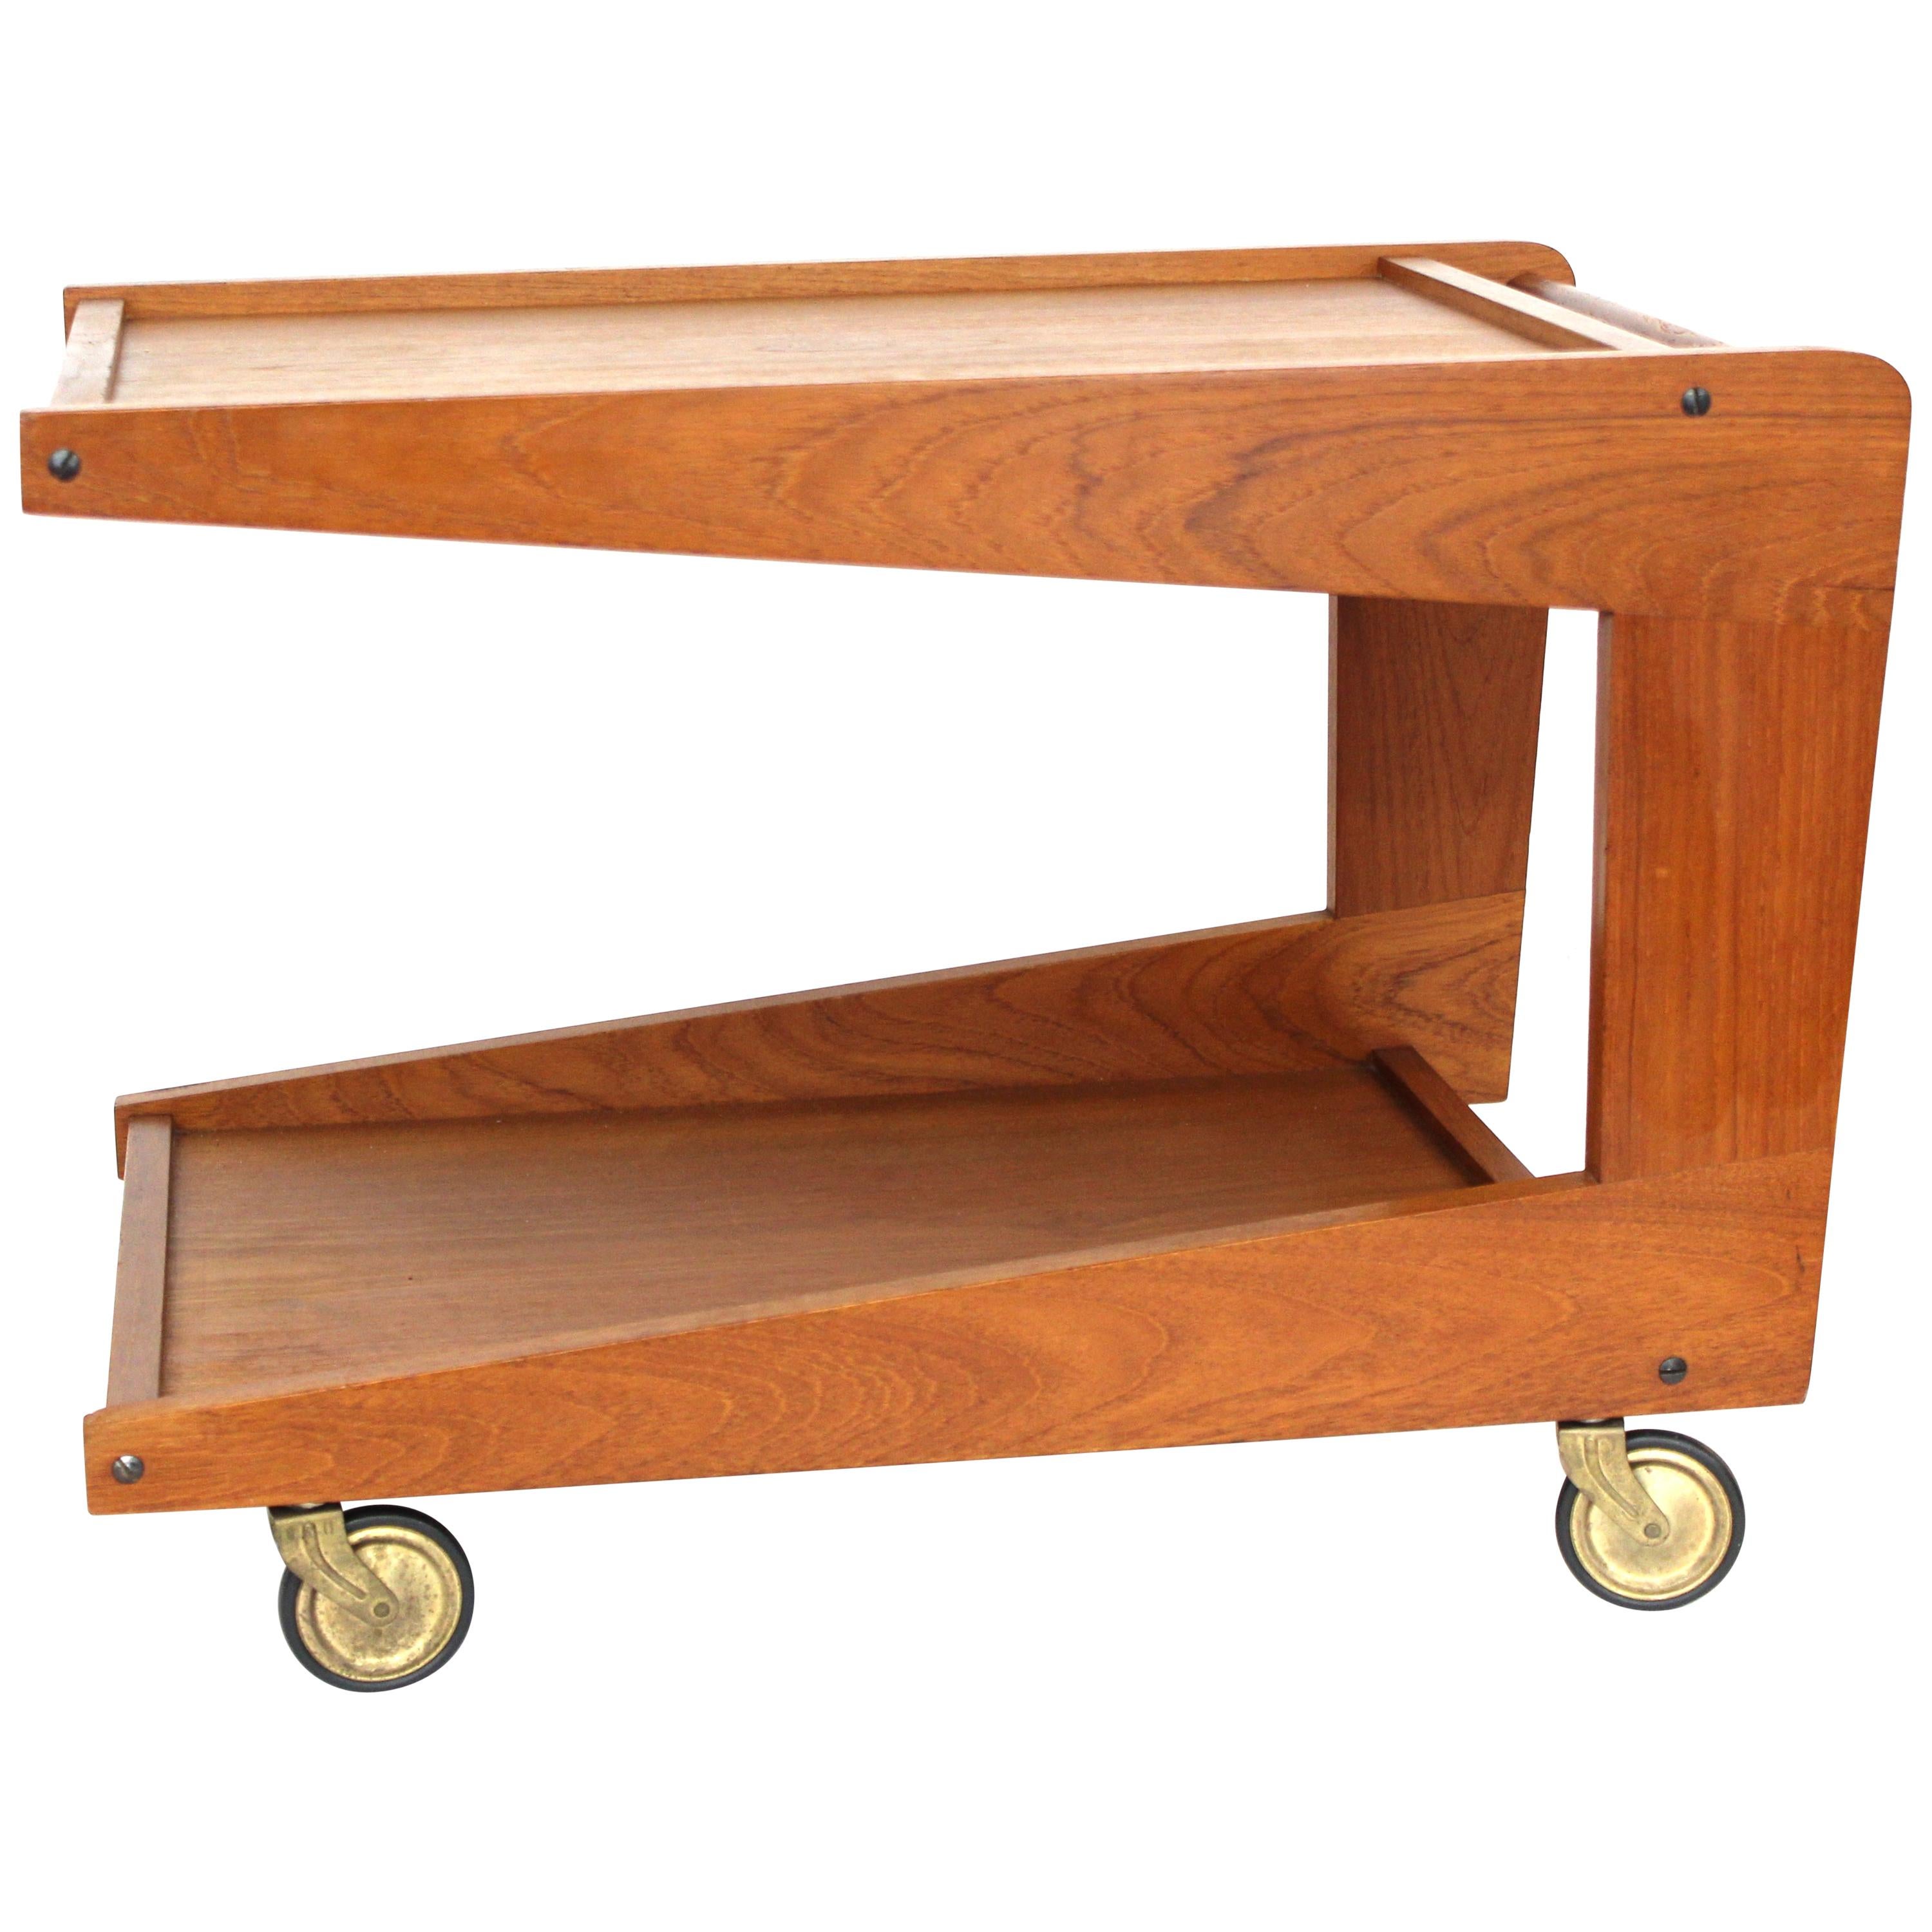 Mid-Century Modern Diminutive Wood Serving Cart or Side Table on Casters